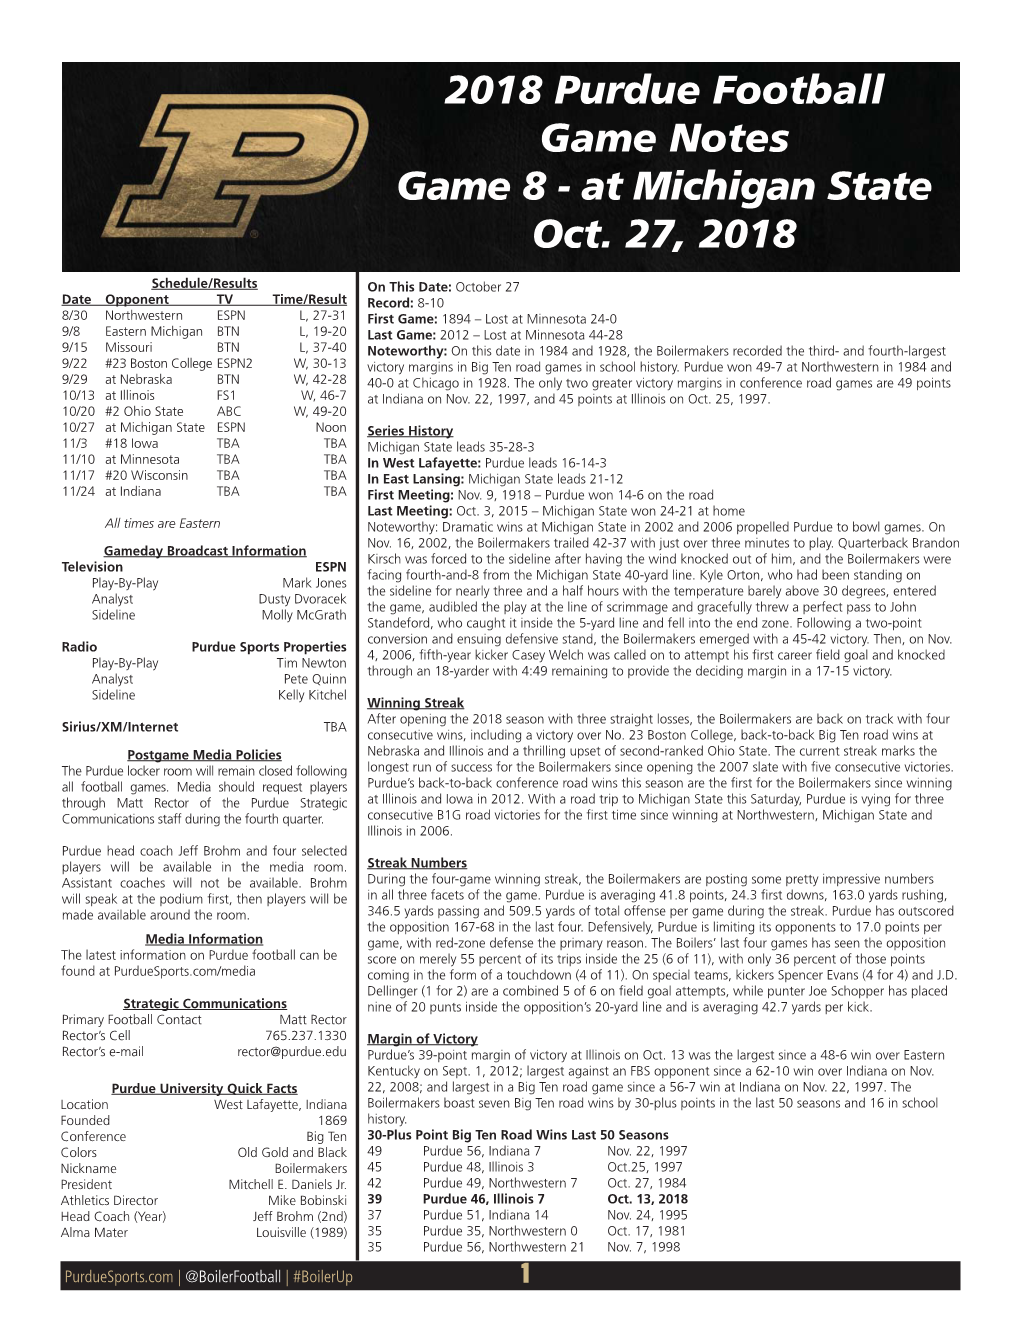 2018 Purdue Football Game Notes Game 8 - at Michigan State Oct